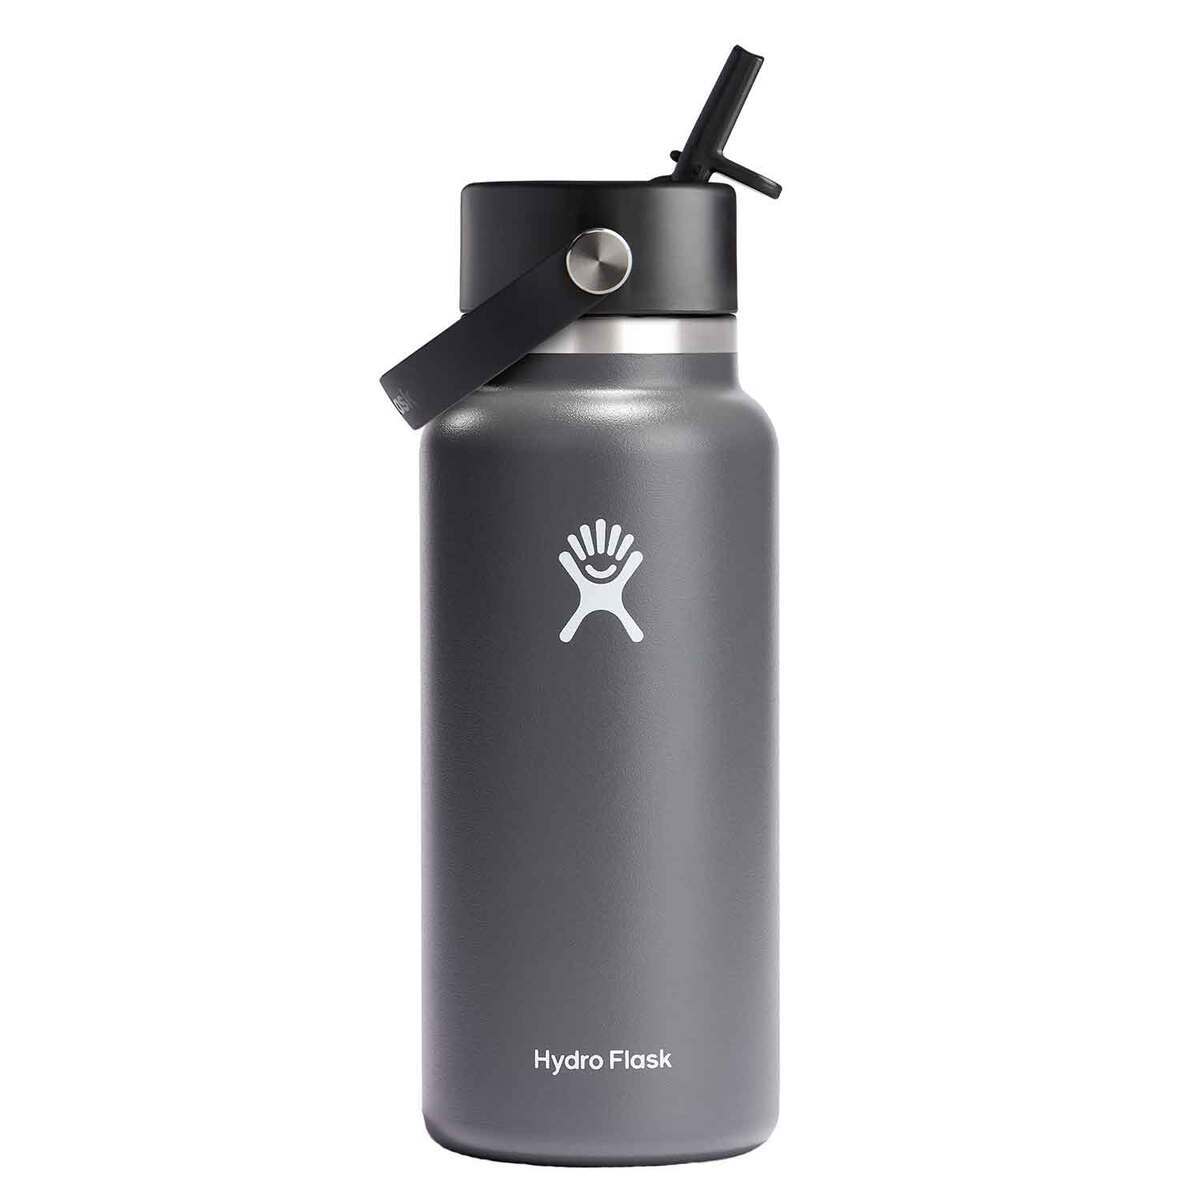 Hydro Flask 64oz Wide Mouth Bottle, Stone